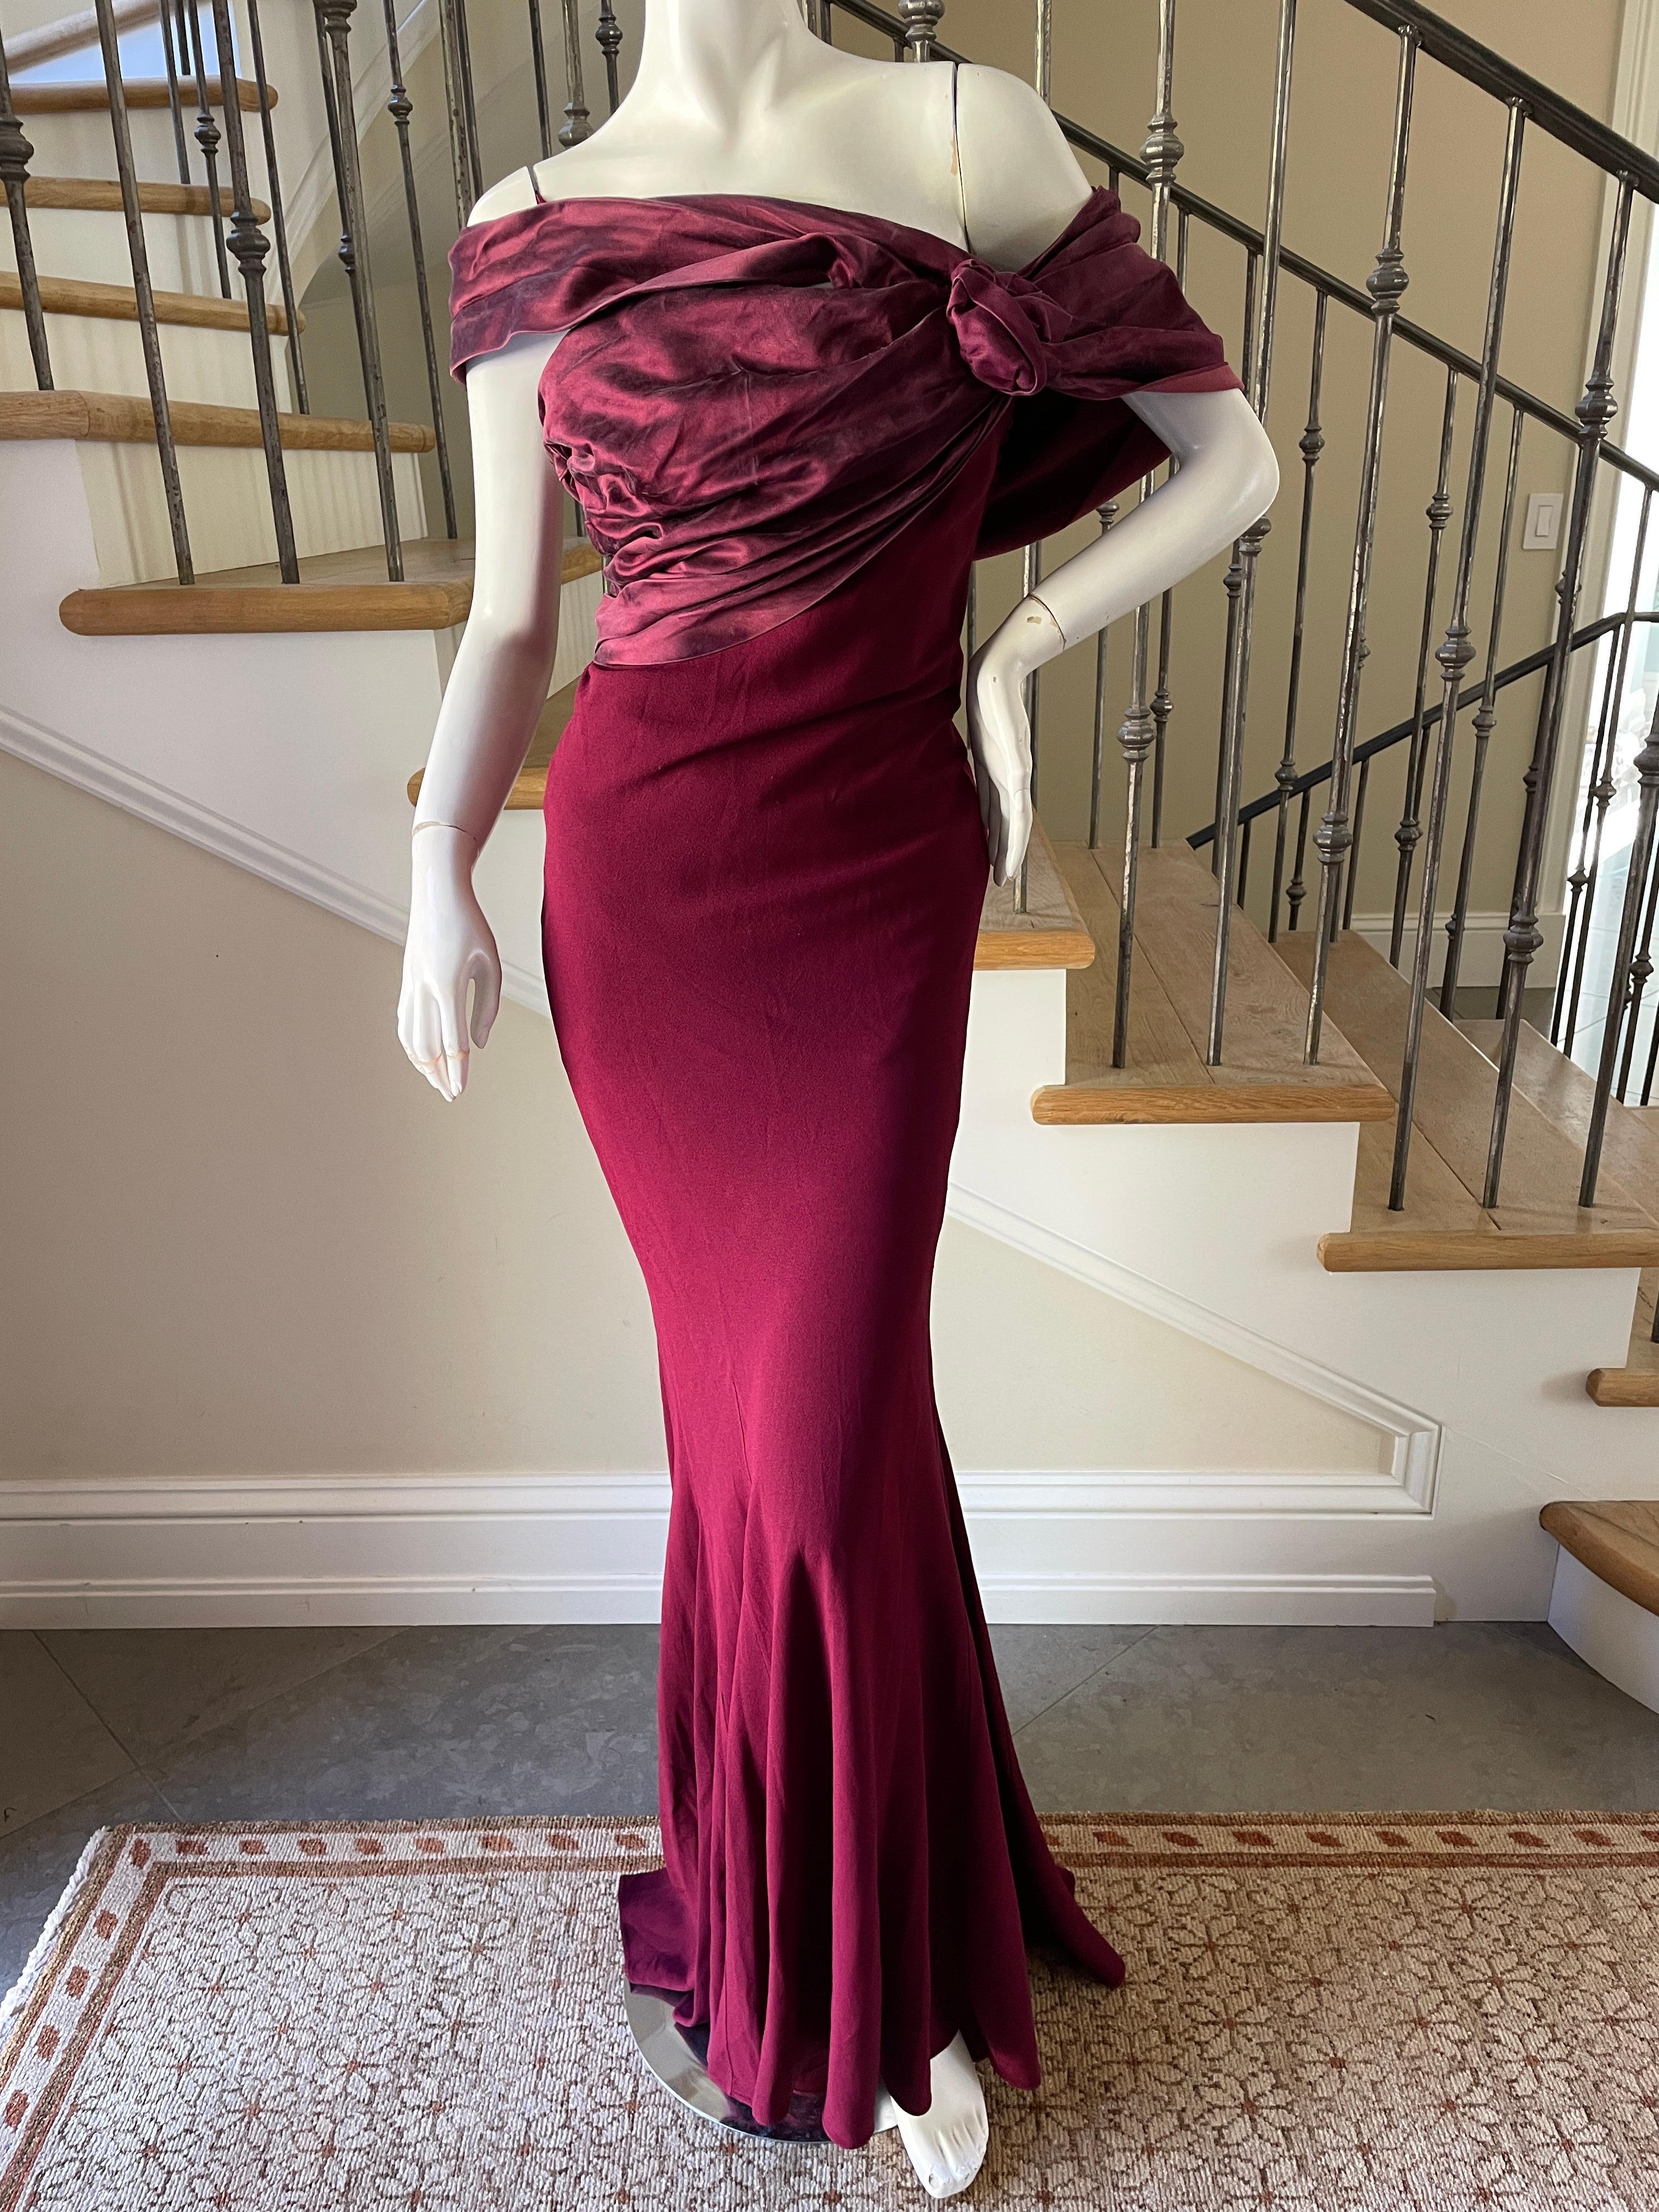 Christian Dior by John Galliano Burgundy Red Draped Evening Dress In Excellent Condition For Sale In Cloverdale, CA